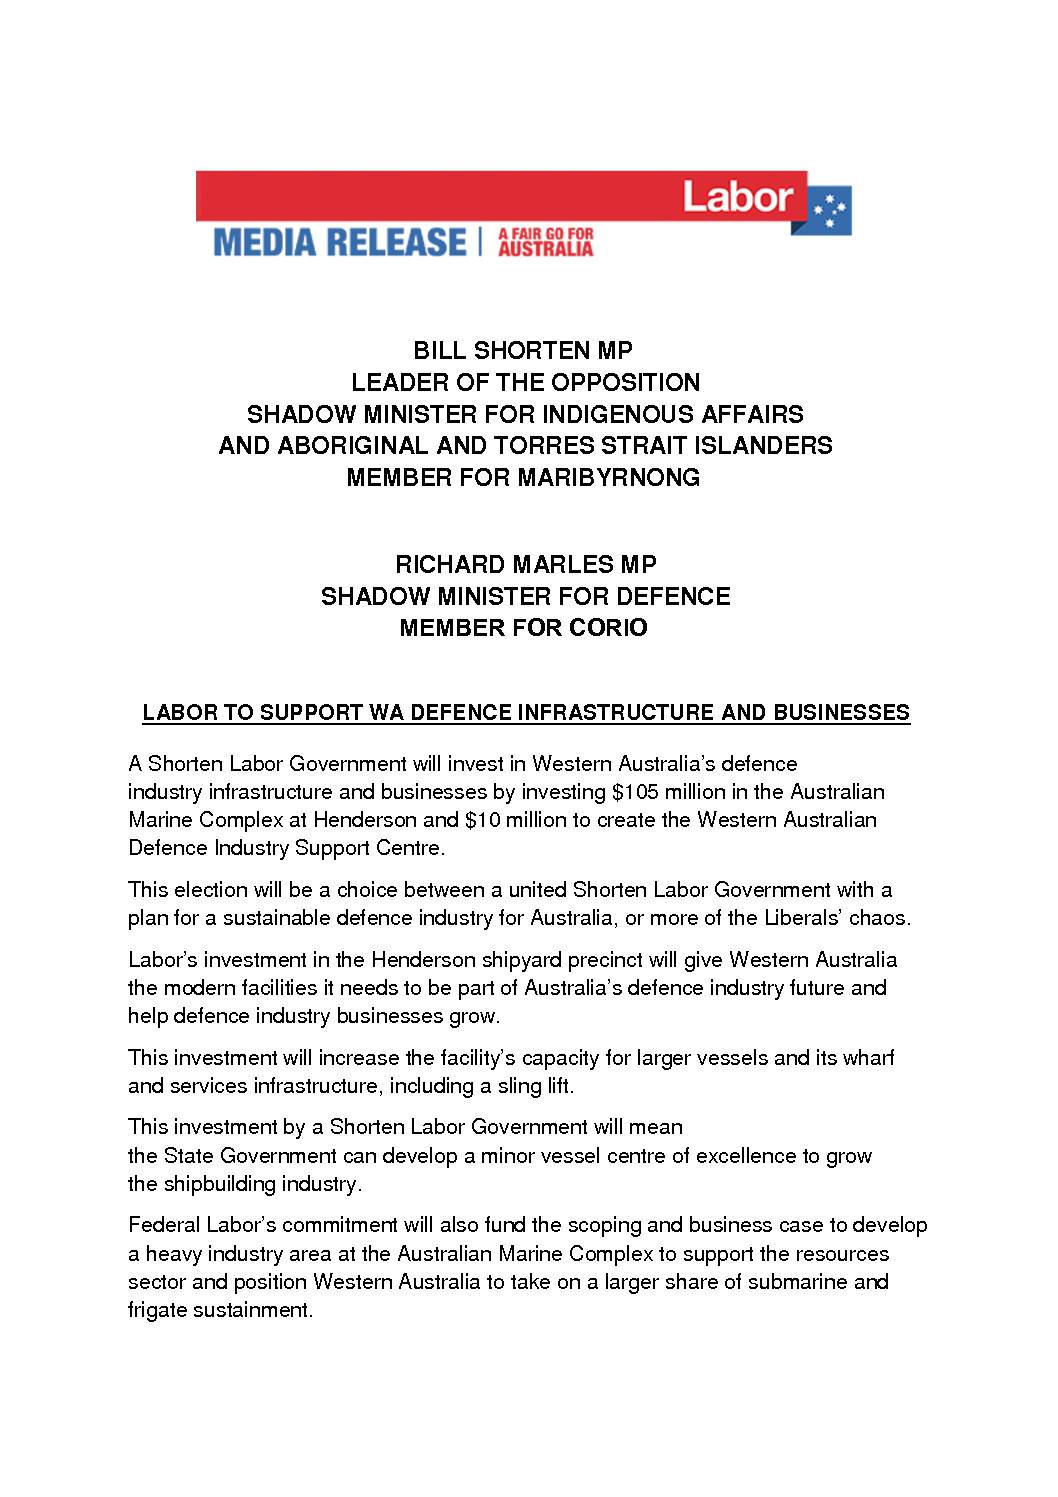 19.04.30 LABOR TO SUPPORT WA DEFENCE INFRASTRUCTURE AND BUSINESSES